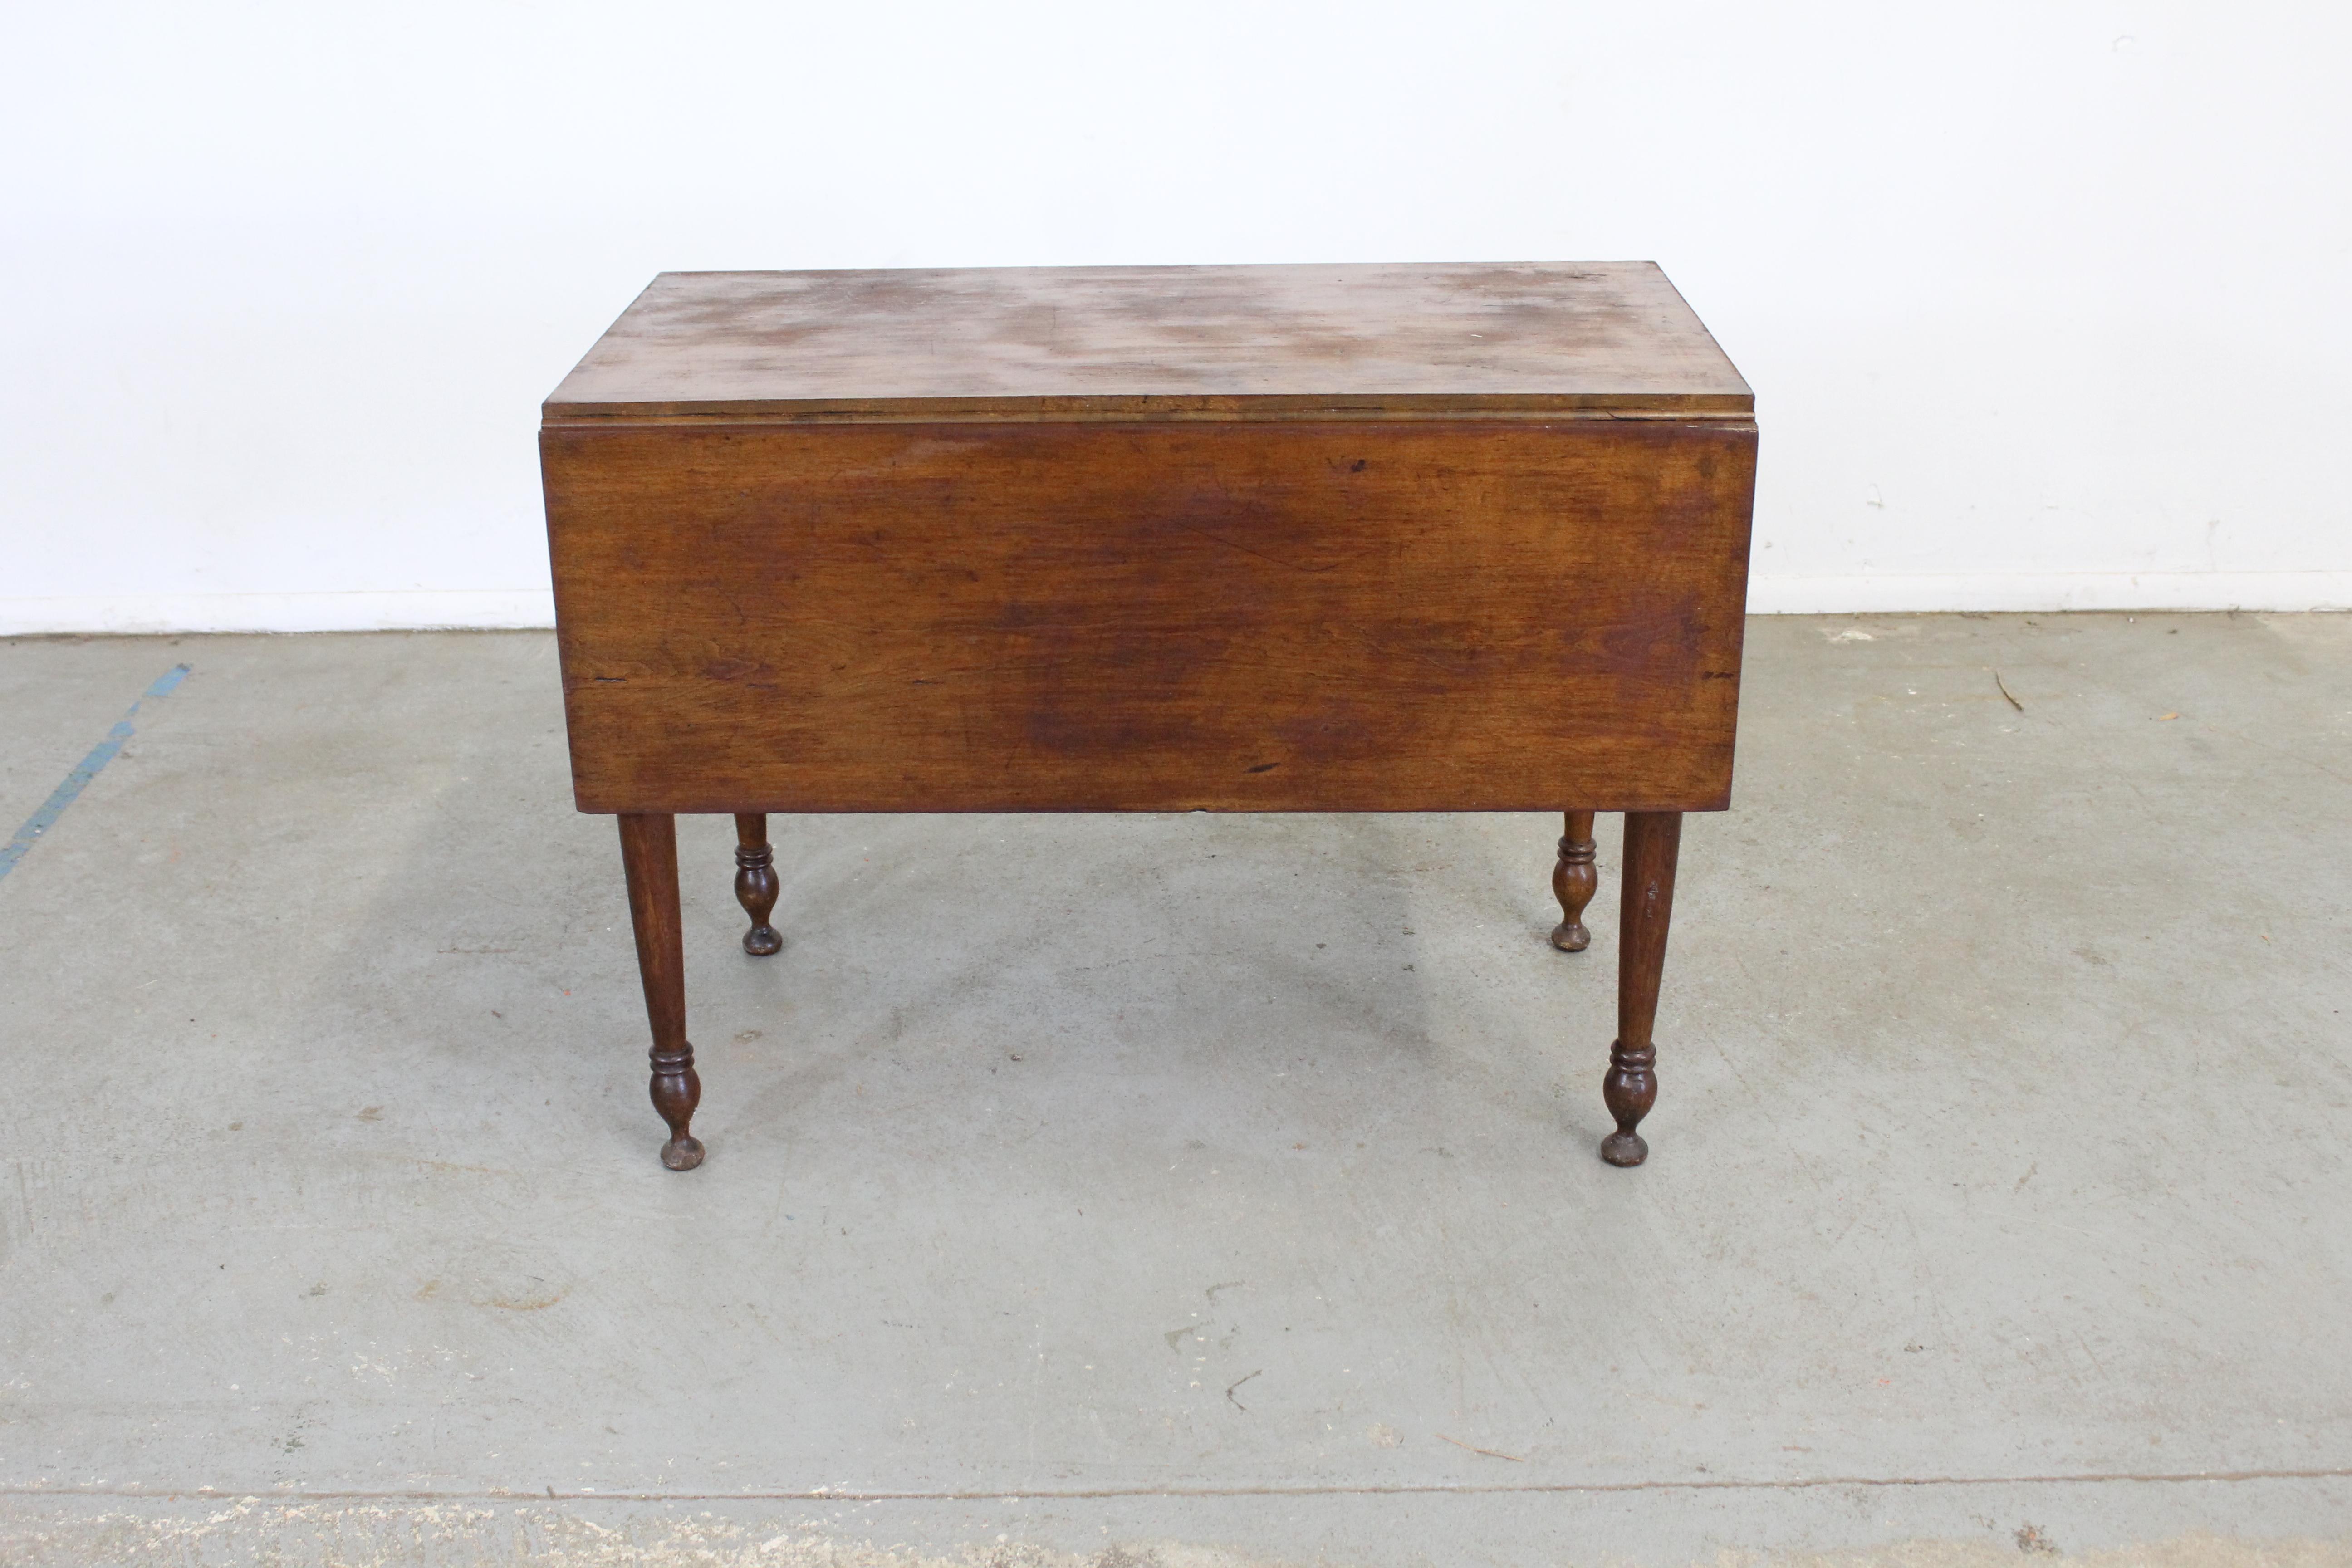 Antique rustic walnut drop leaf table

Offered is an antique drop leaf table. The table shows some scratches and age wear, the walnut shows fading and is in obvious vintage condition. It's made of solid walnut wood. It is not signed.